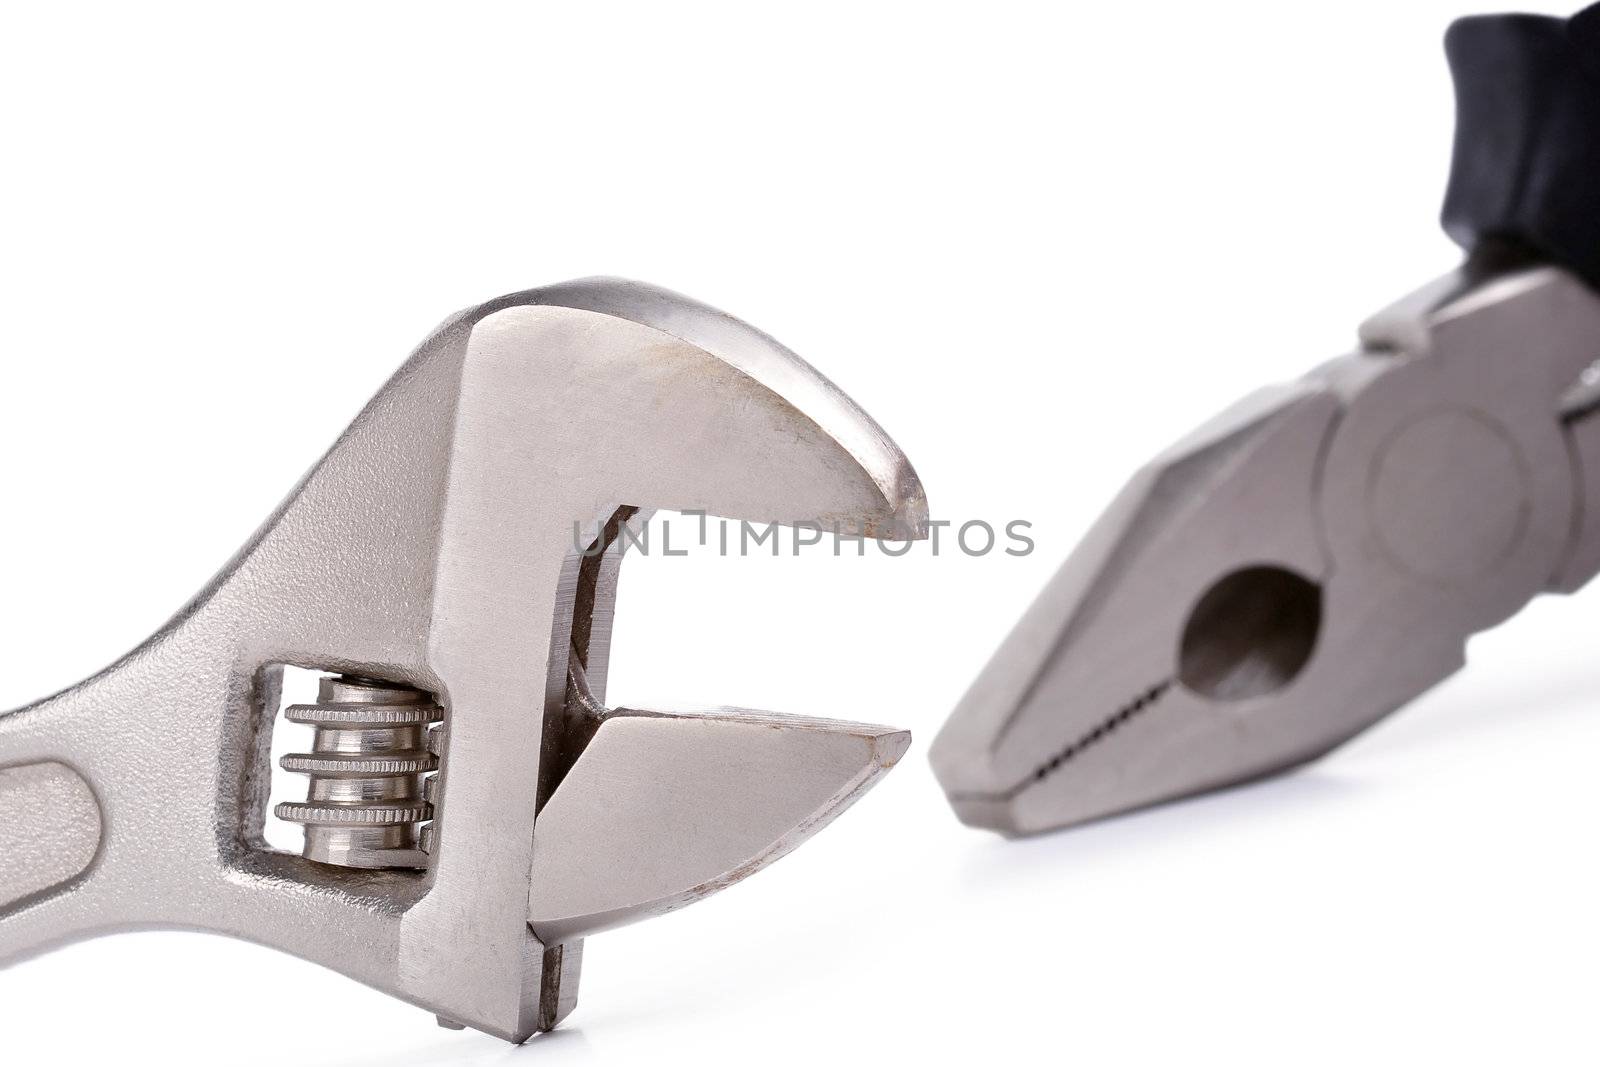 Closeup of a wrench and a pliers on a white background